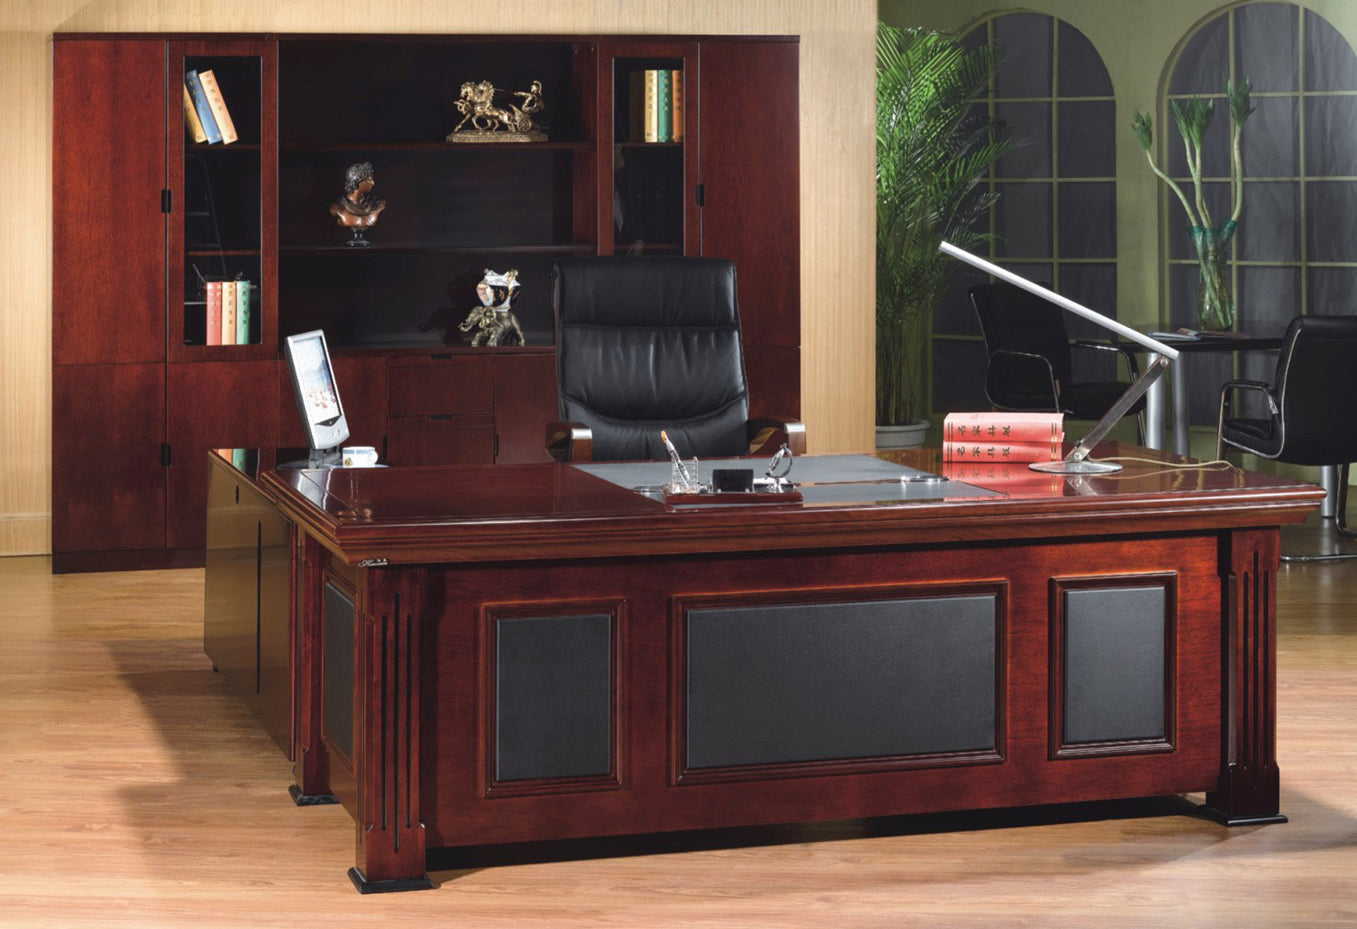 Mahogany Executive Desk With Leather Detailing - With Pedestal and Return - 2233 North Yorkshire